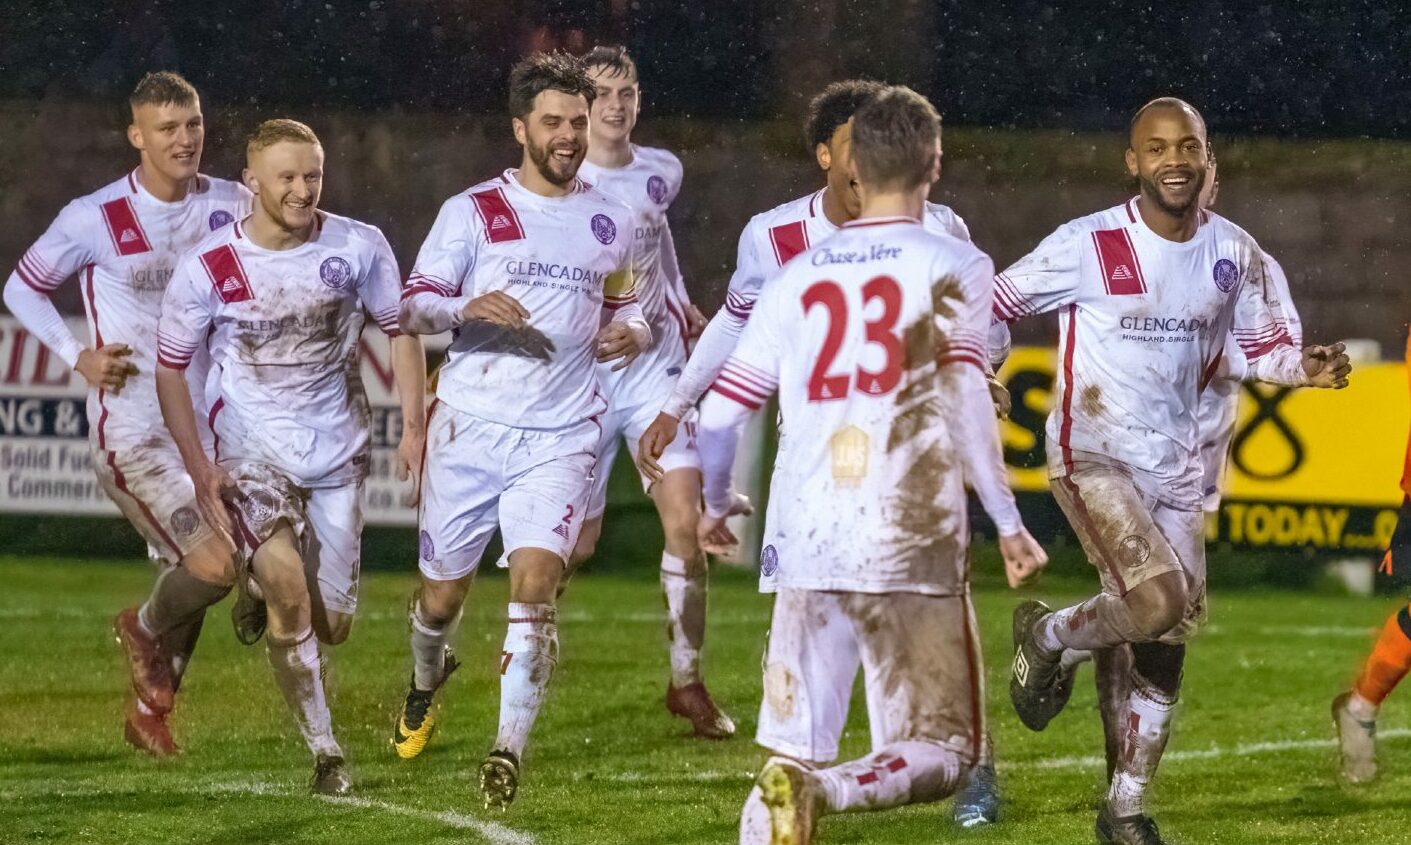 Brechin City have the opportunity to close the gap at the top of the Highland Table when they host Nairn County.